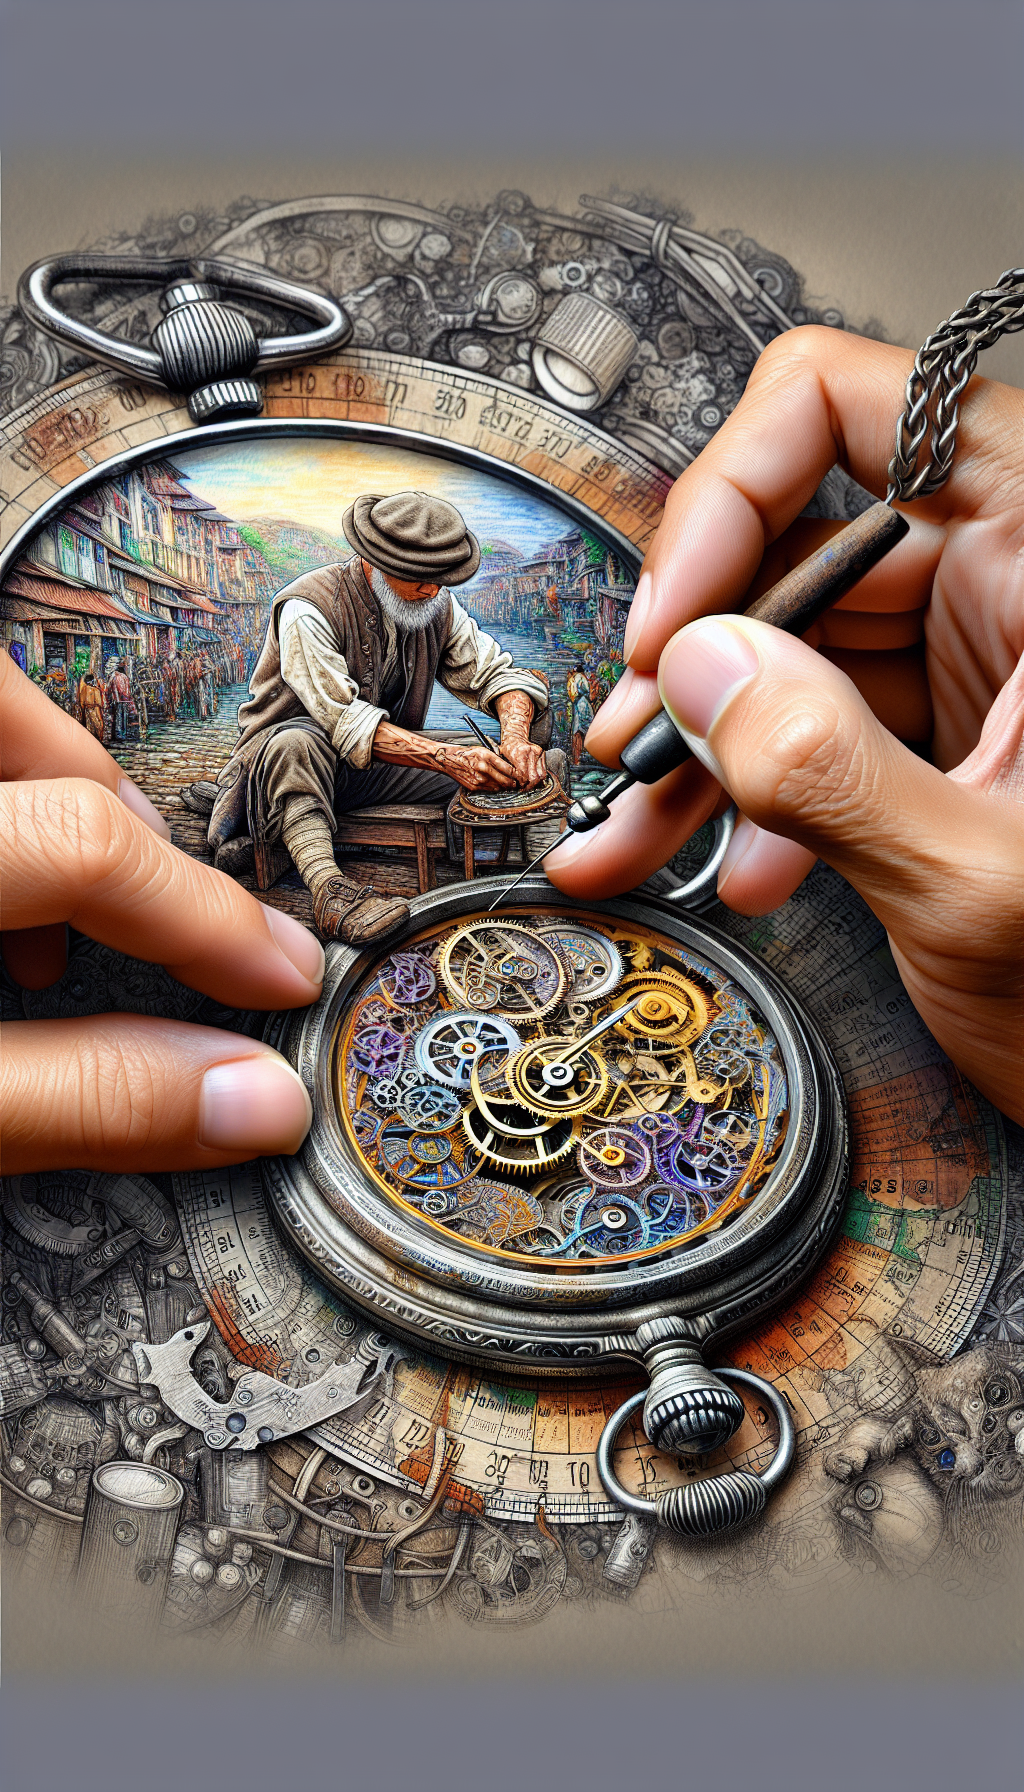 An artisan's hands intricately engrave a vintage pocket watch, with delicate patterns that trail off and morph into sketched historical timelines and global maps—symbolizing provenance. The surrounding vignette includes close-ups of watch gears in photorealistic detail, juxtaposed with a watercolor marketplace scene. This melange underscores the fusion of timeless craftsmanship and the antique's valued journey through time and geography.